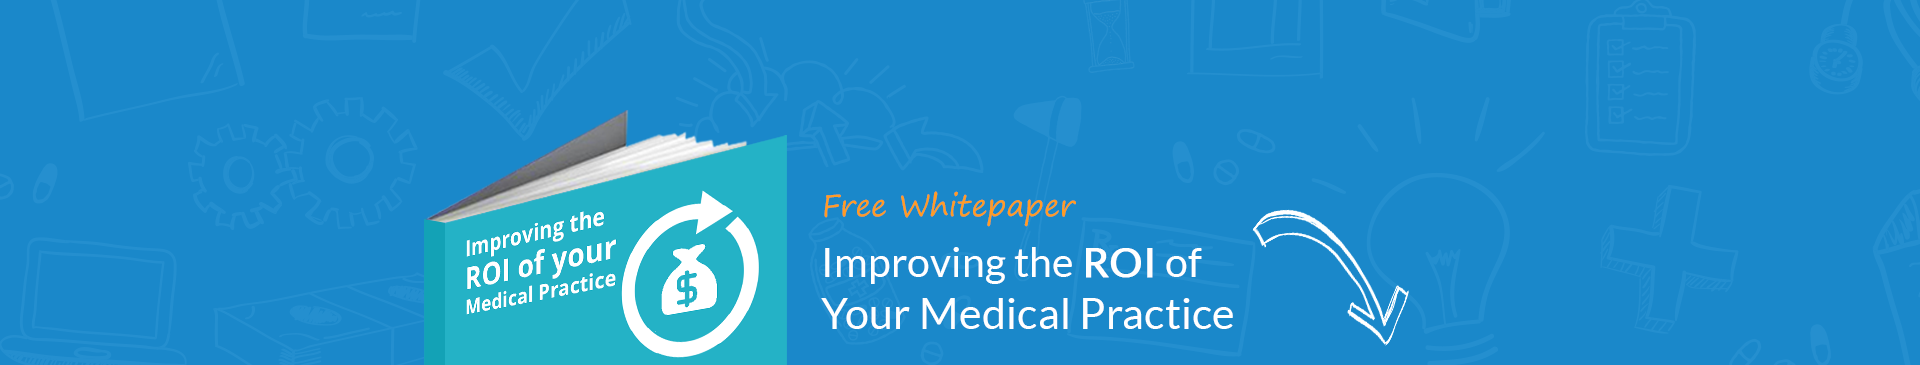 Improving the ROI of your medical practice!